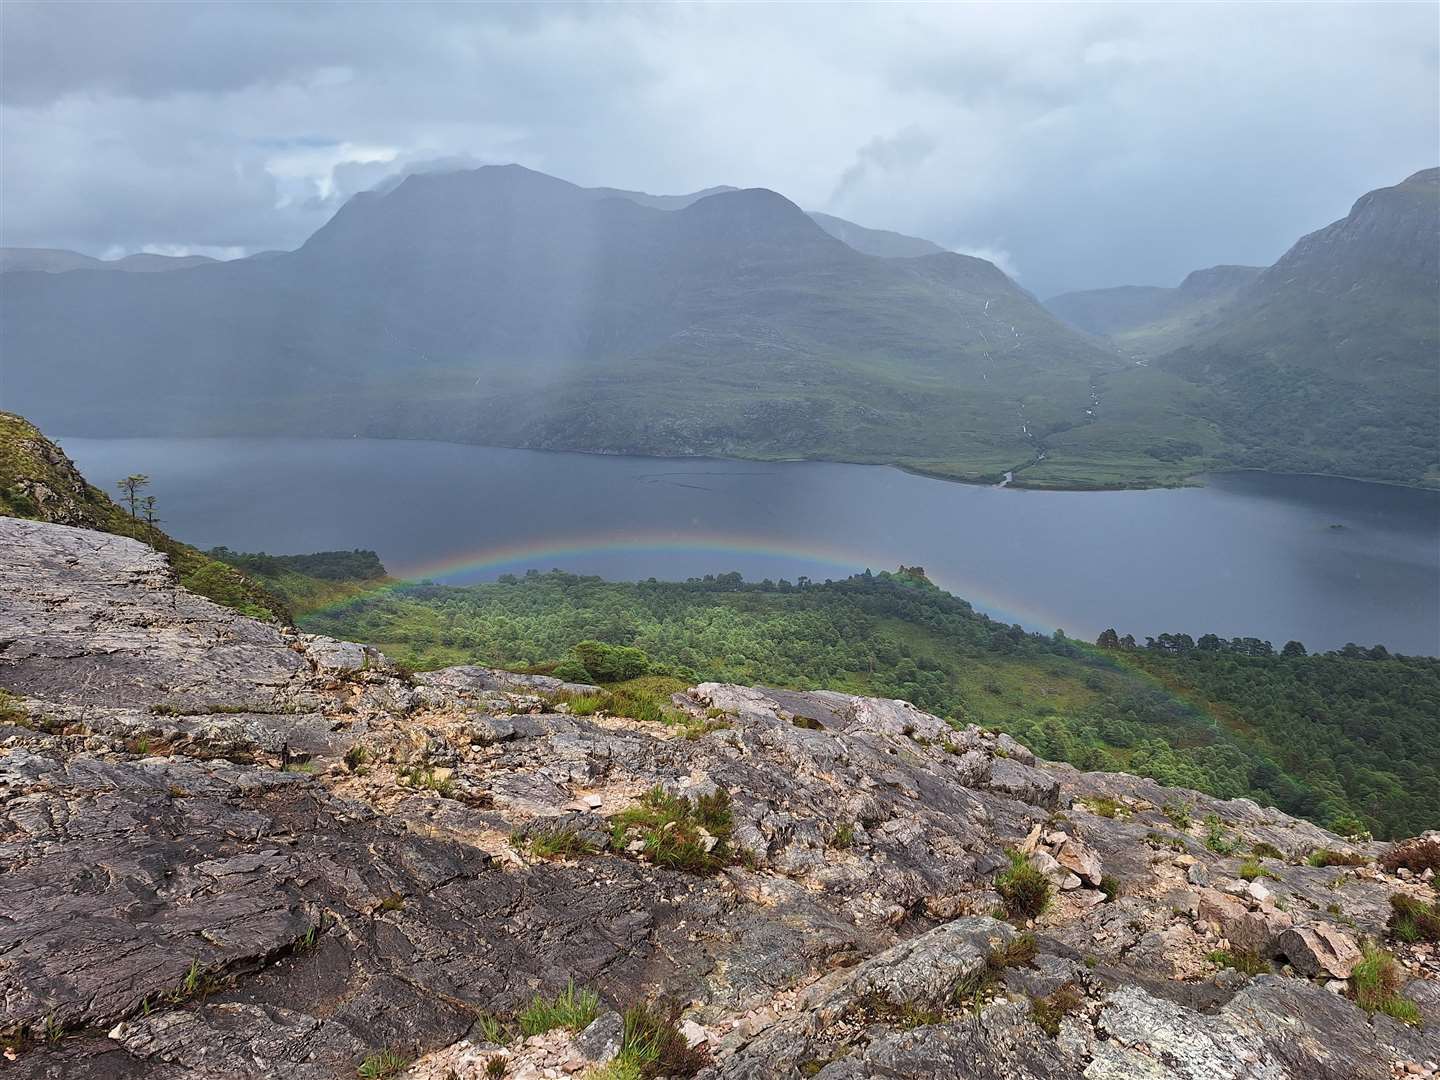 A rainbow appears over the woodland below, with Slioch in the background.